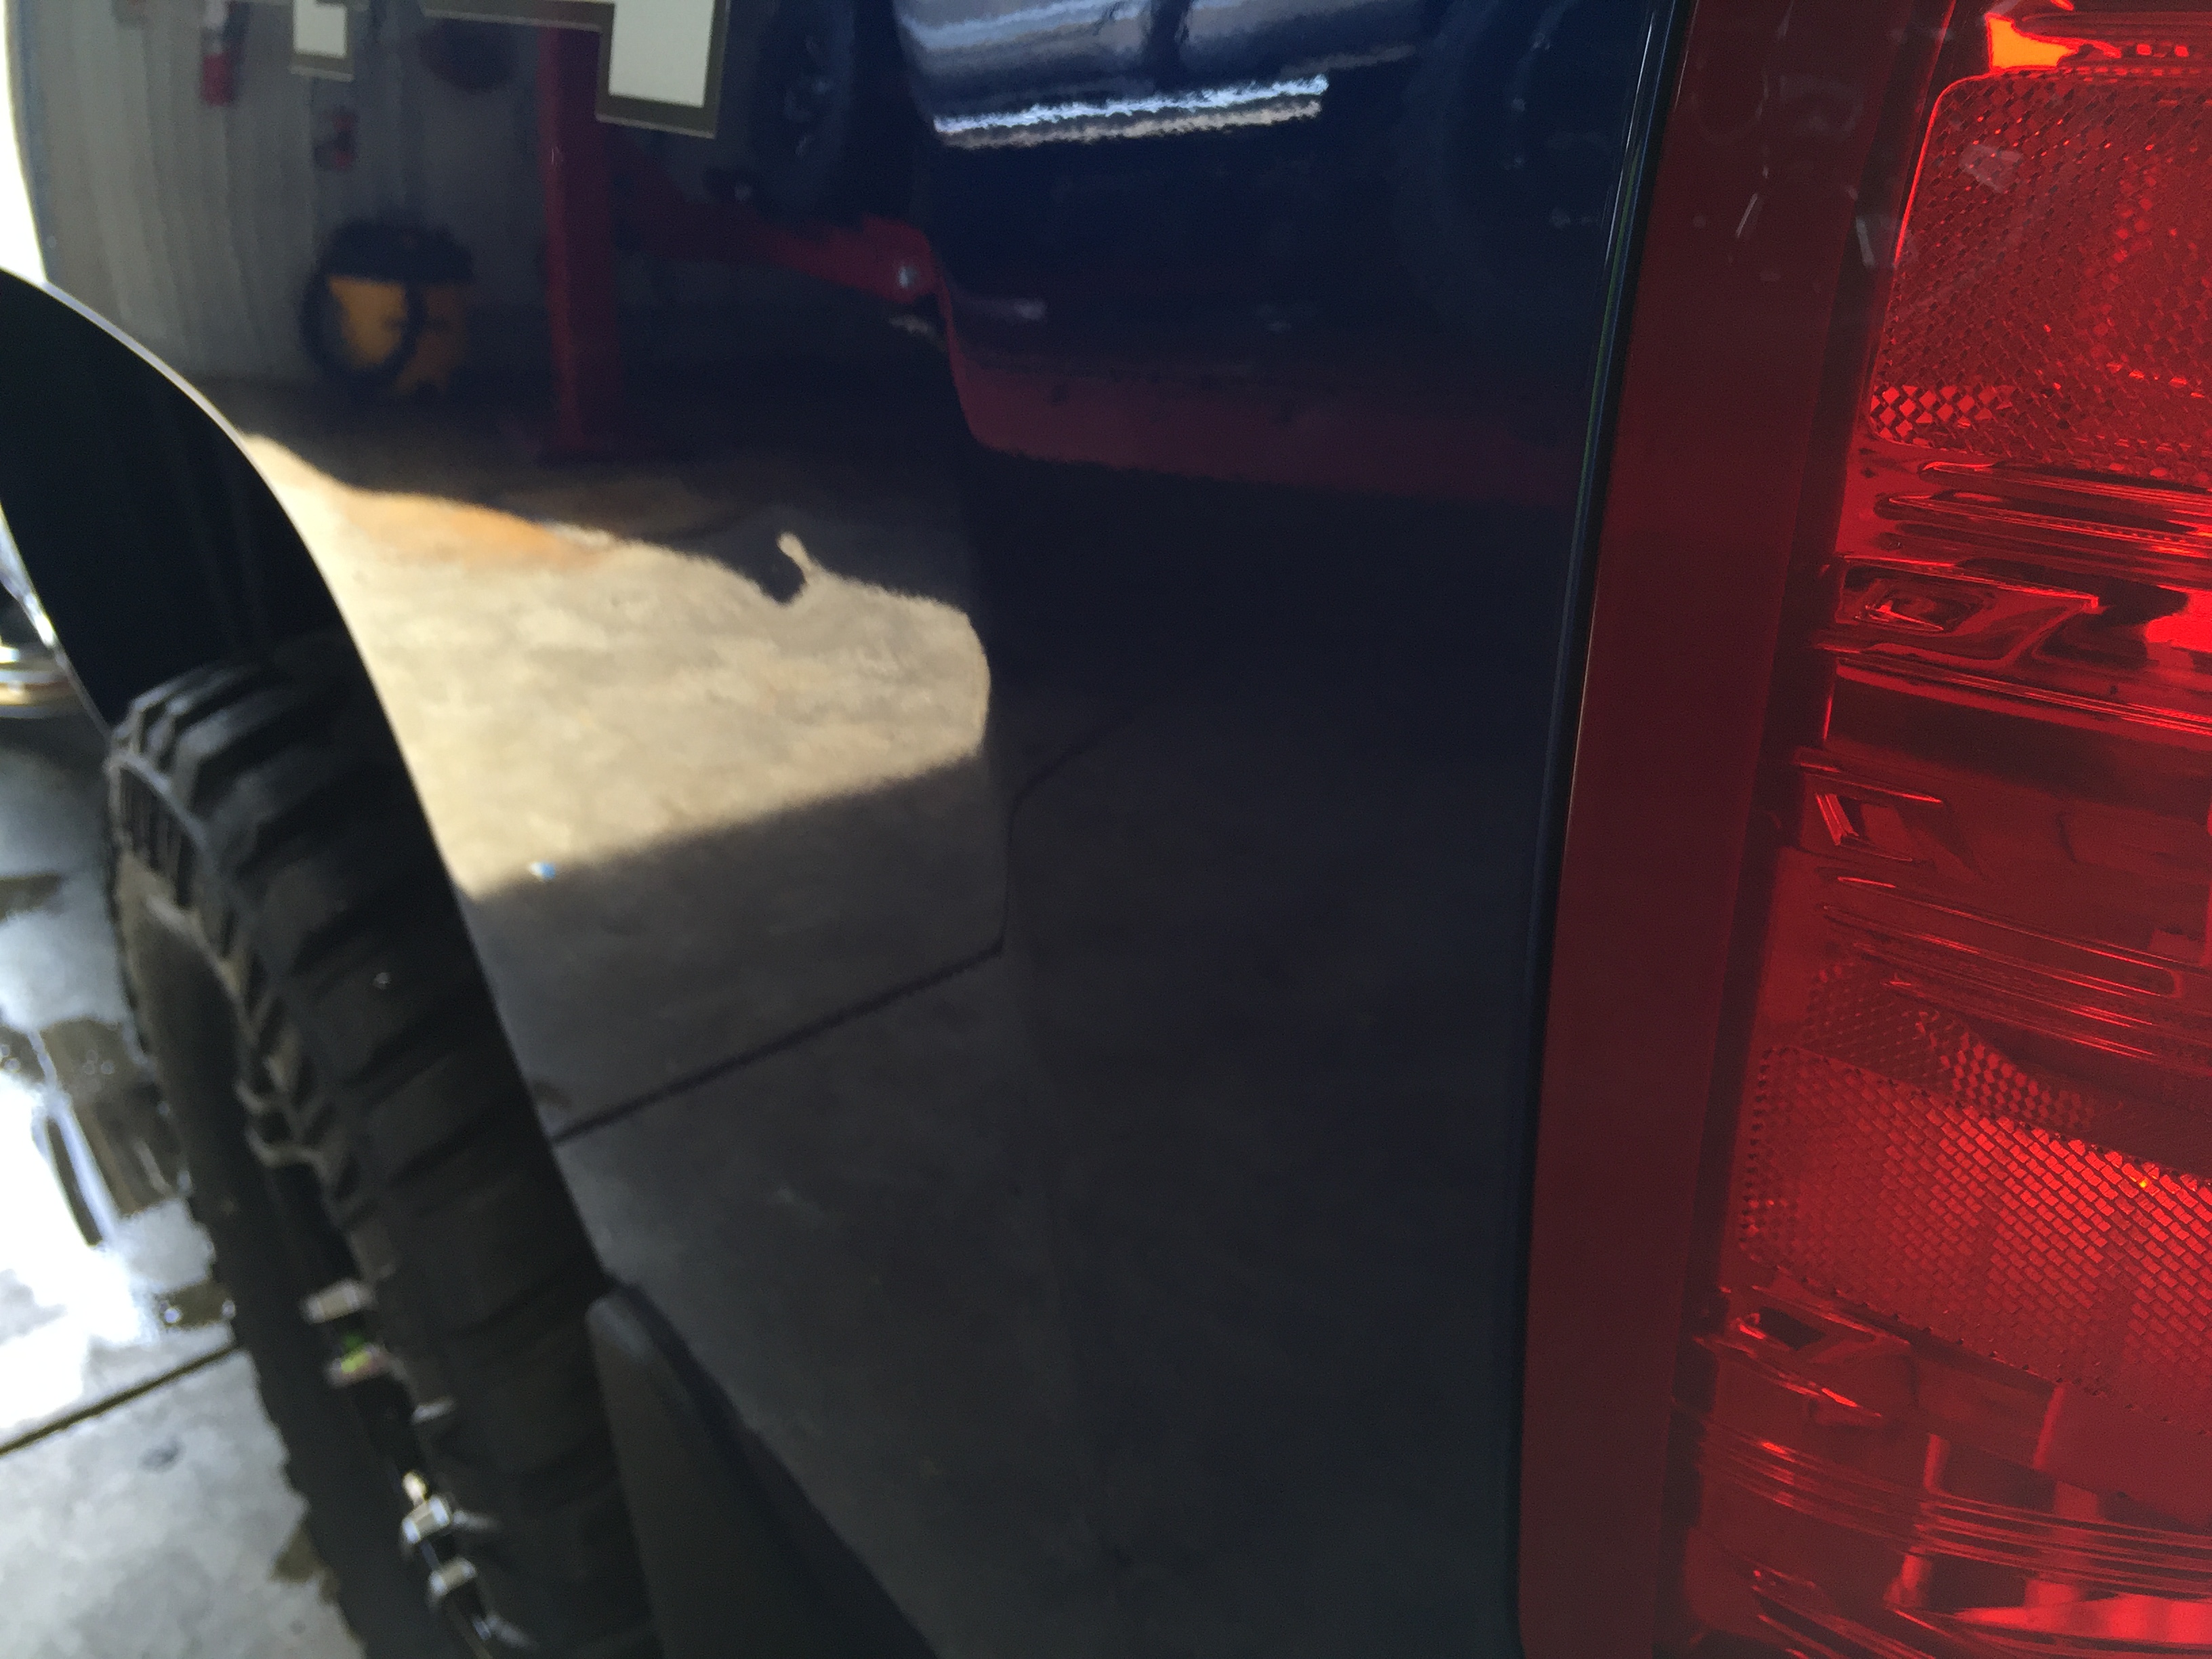 2013 Chevy Silverado, dent repair on the bedside removed with paintless dent removal, in or around Springfield, IL, http://217dent.com